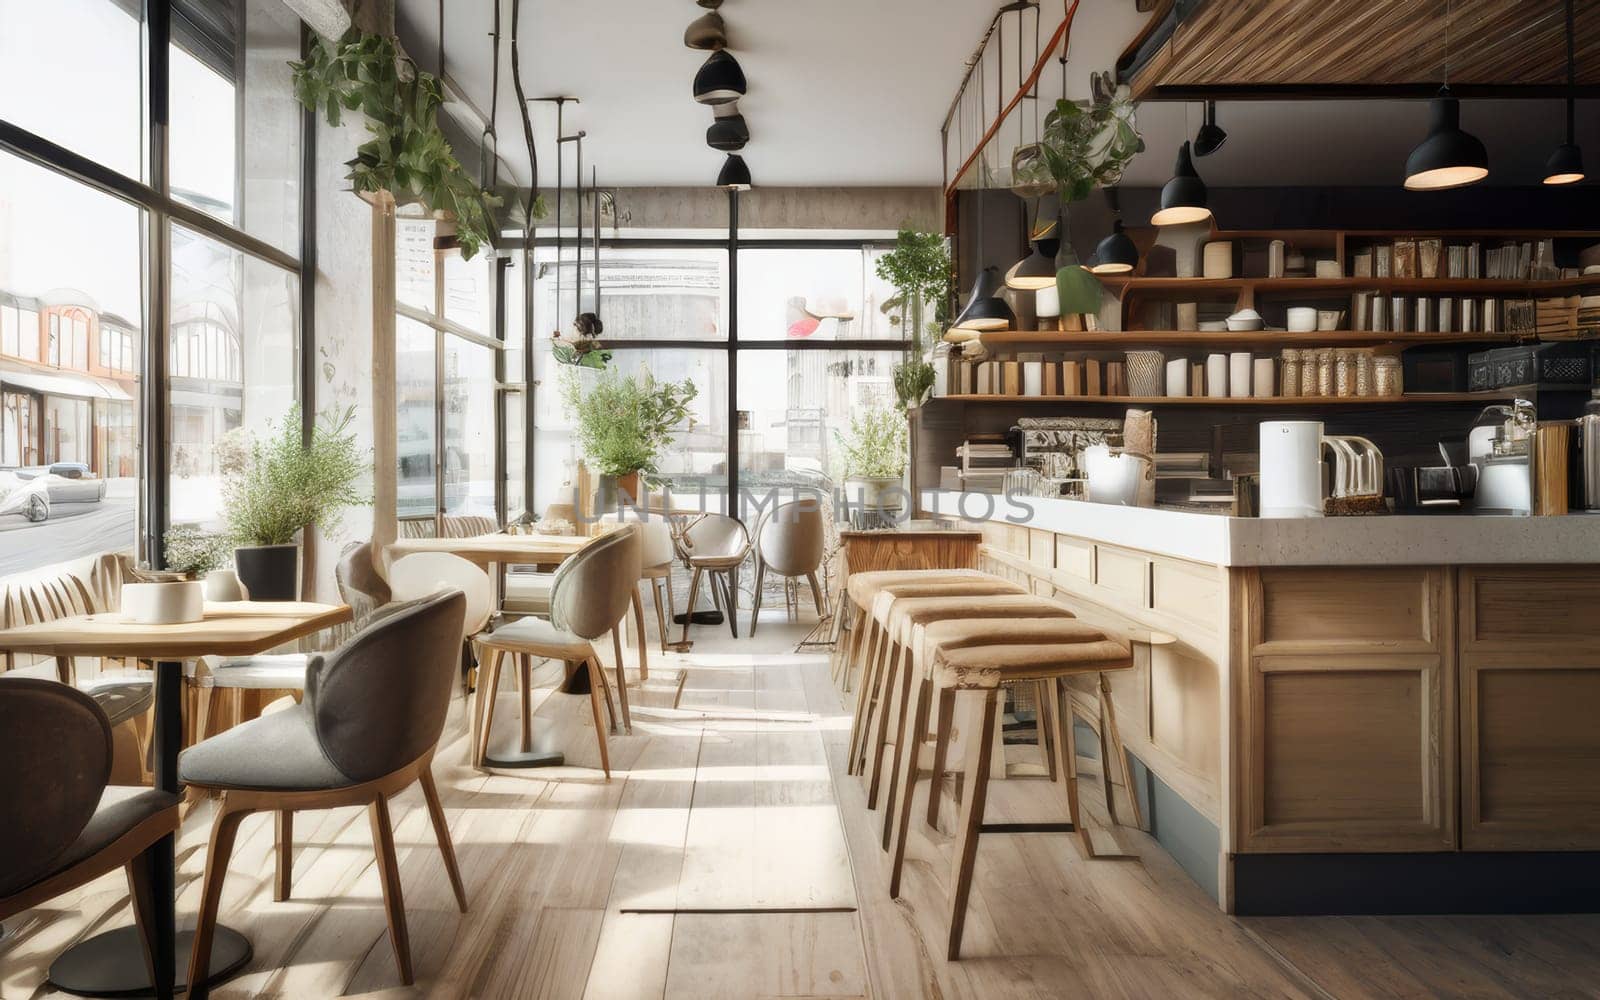 Cozy modern cafe interior design. Fashionable Scandinavian cozy interior of restaurant or cafe in neutral light colors with tables and bar counter.